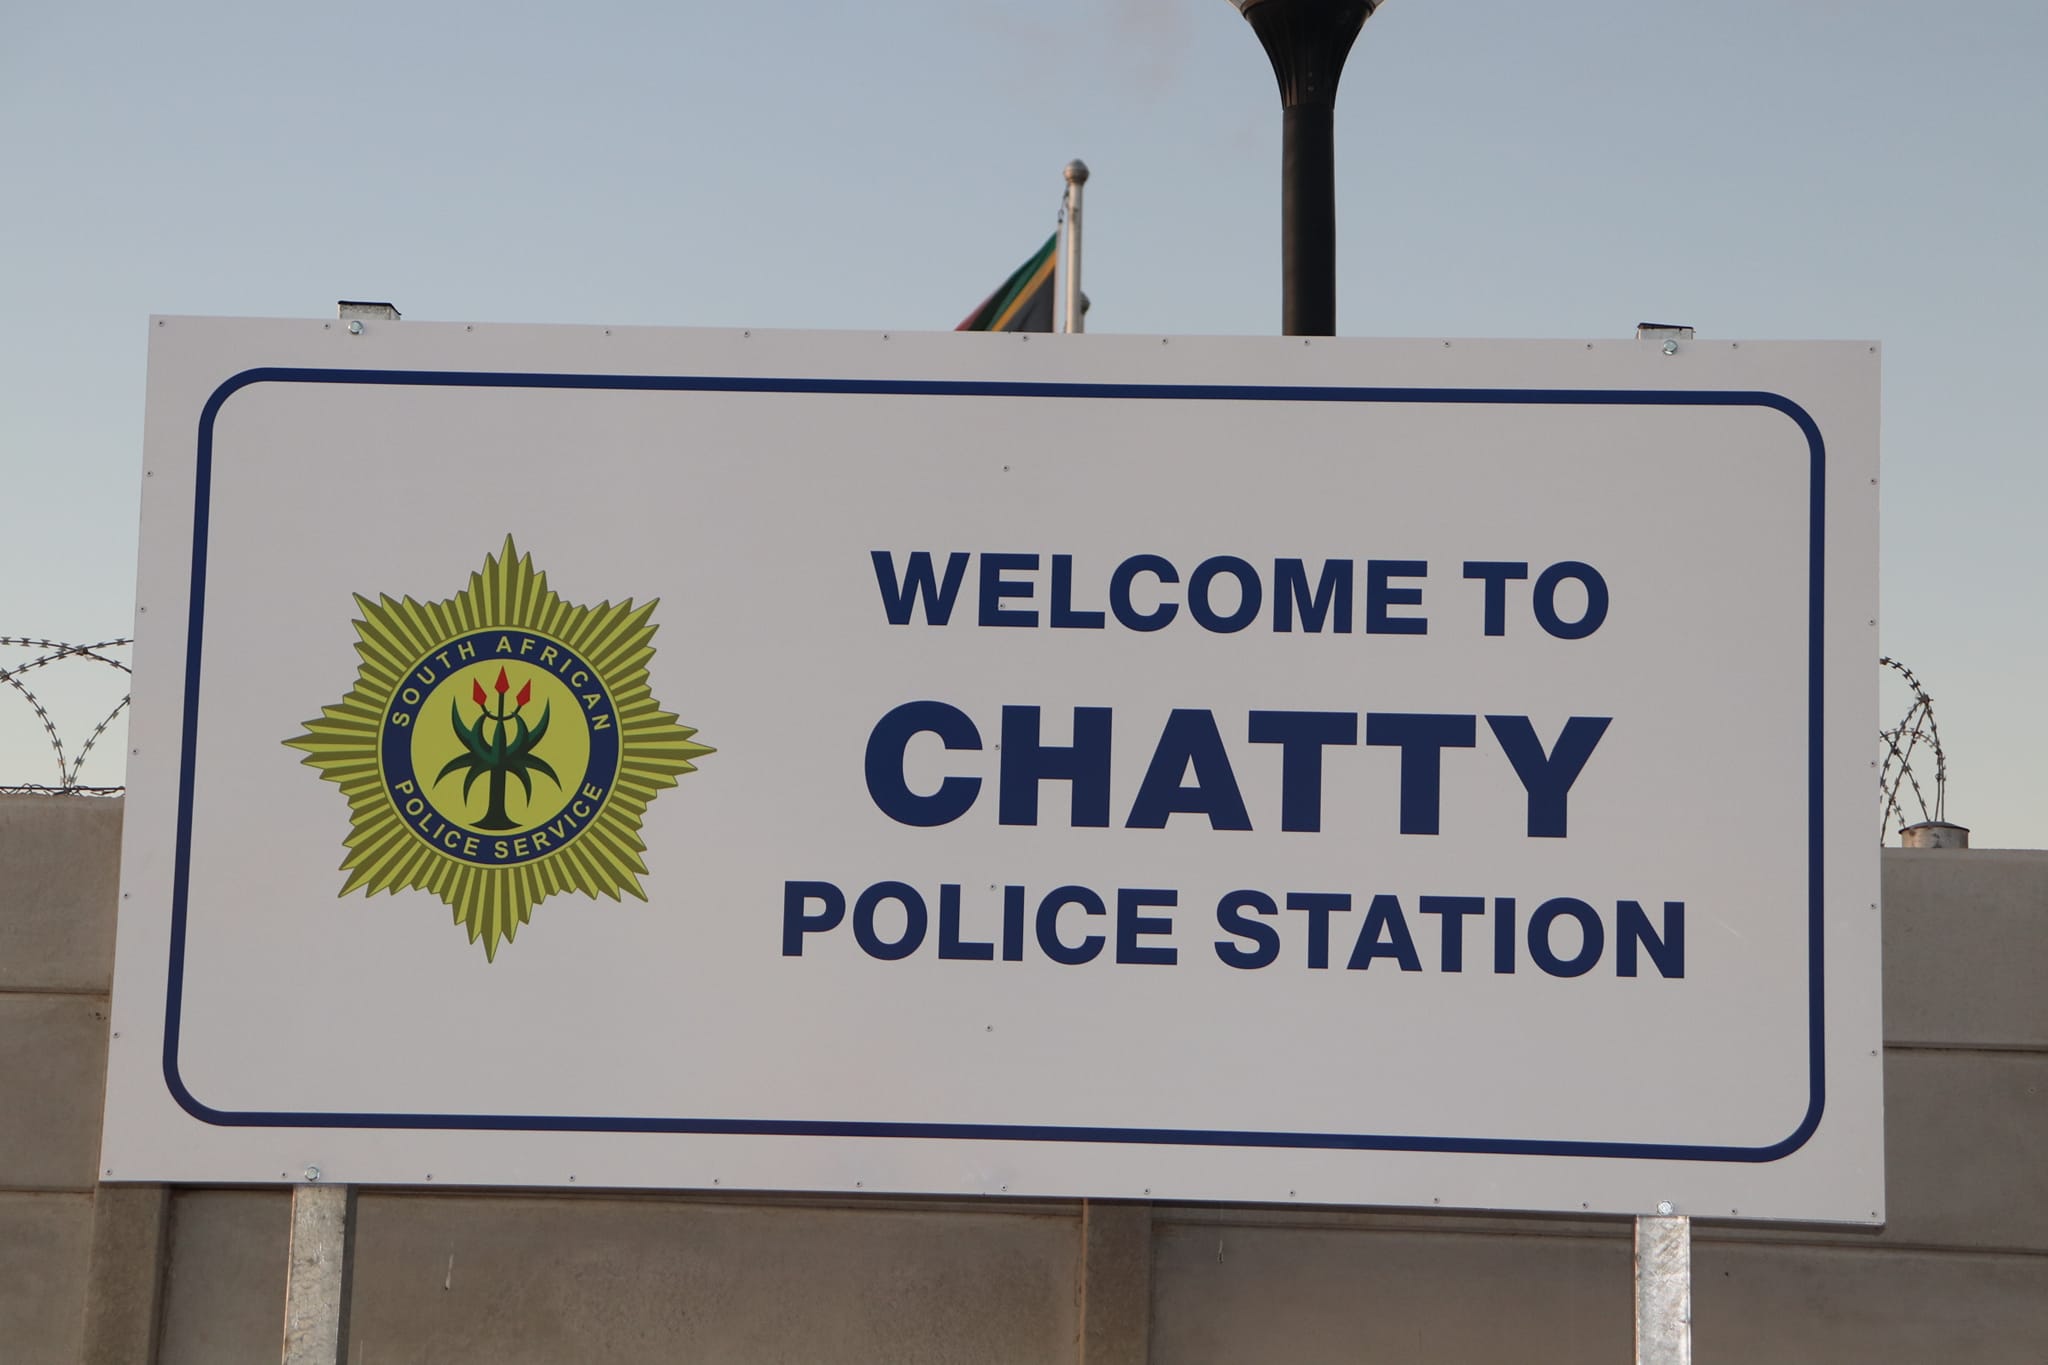 Chatty Police Station in the Eastern Cape has officially opened